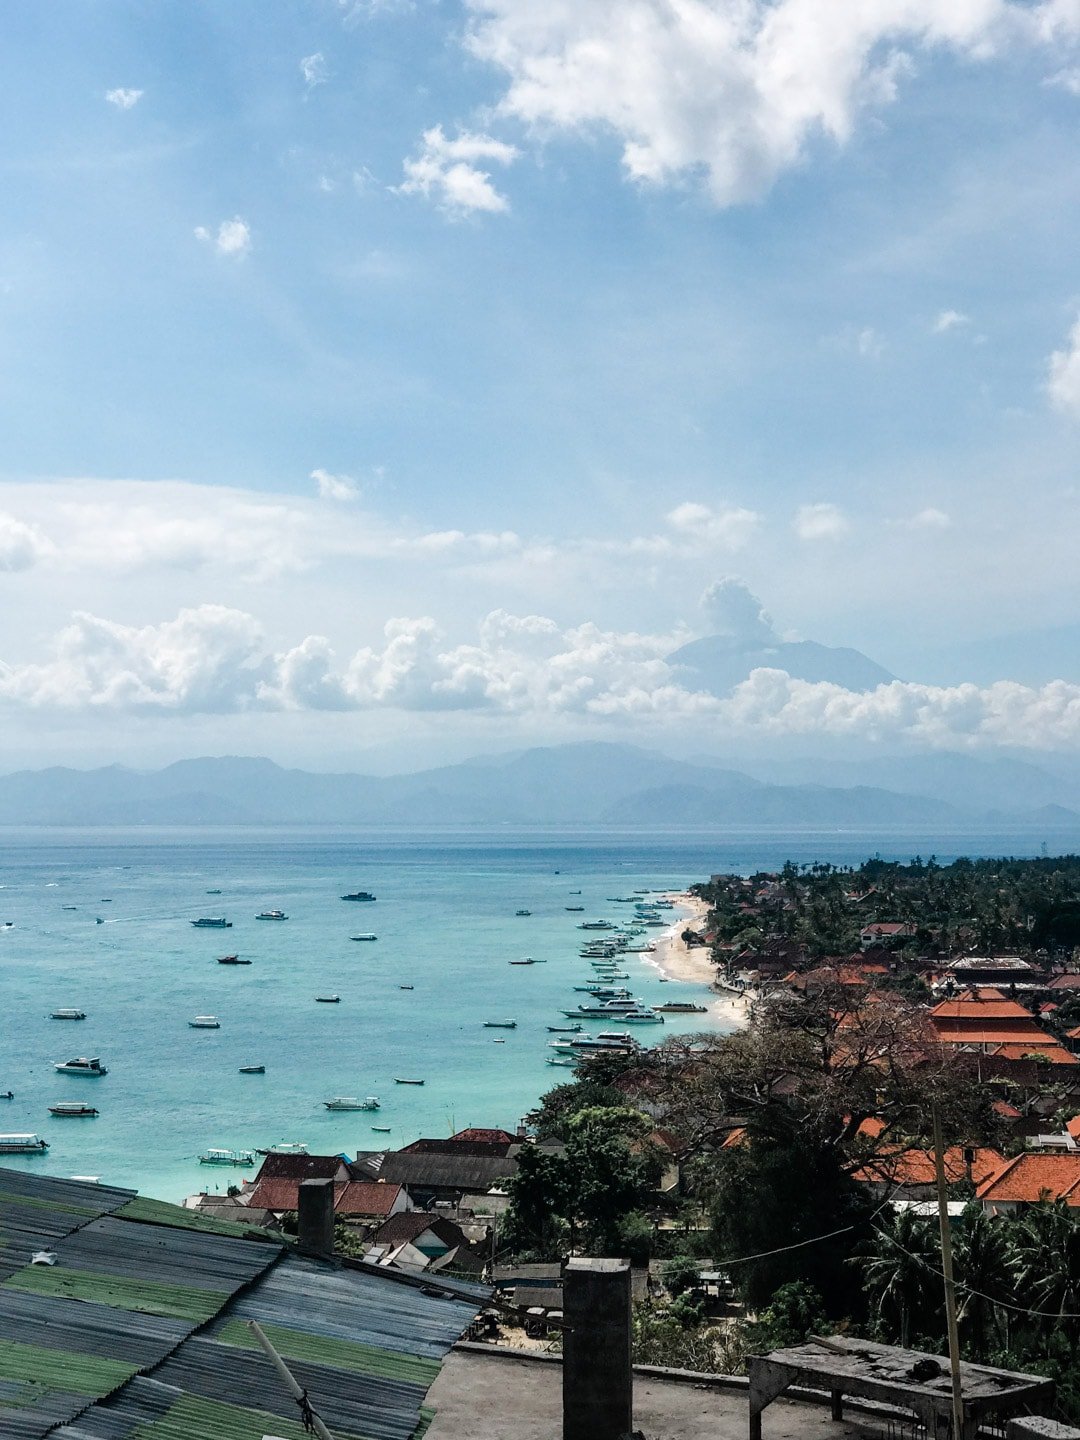 A view overlooking the beach in Lembongan, Bali, Indonesia. A volcano peeks through the clouds in the distance.